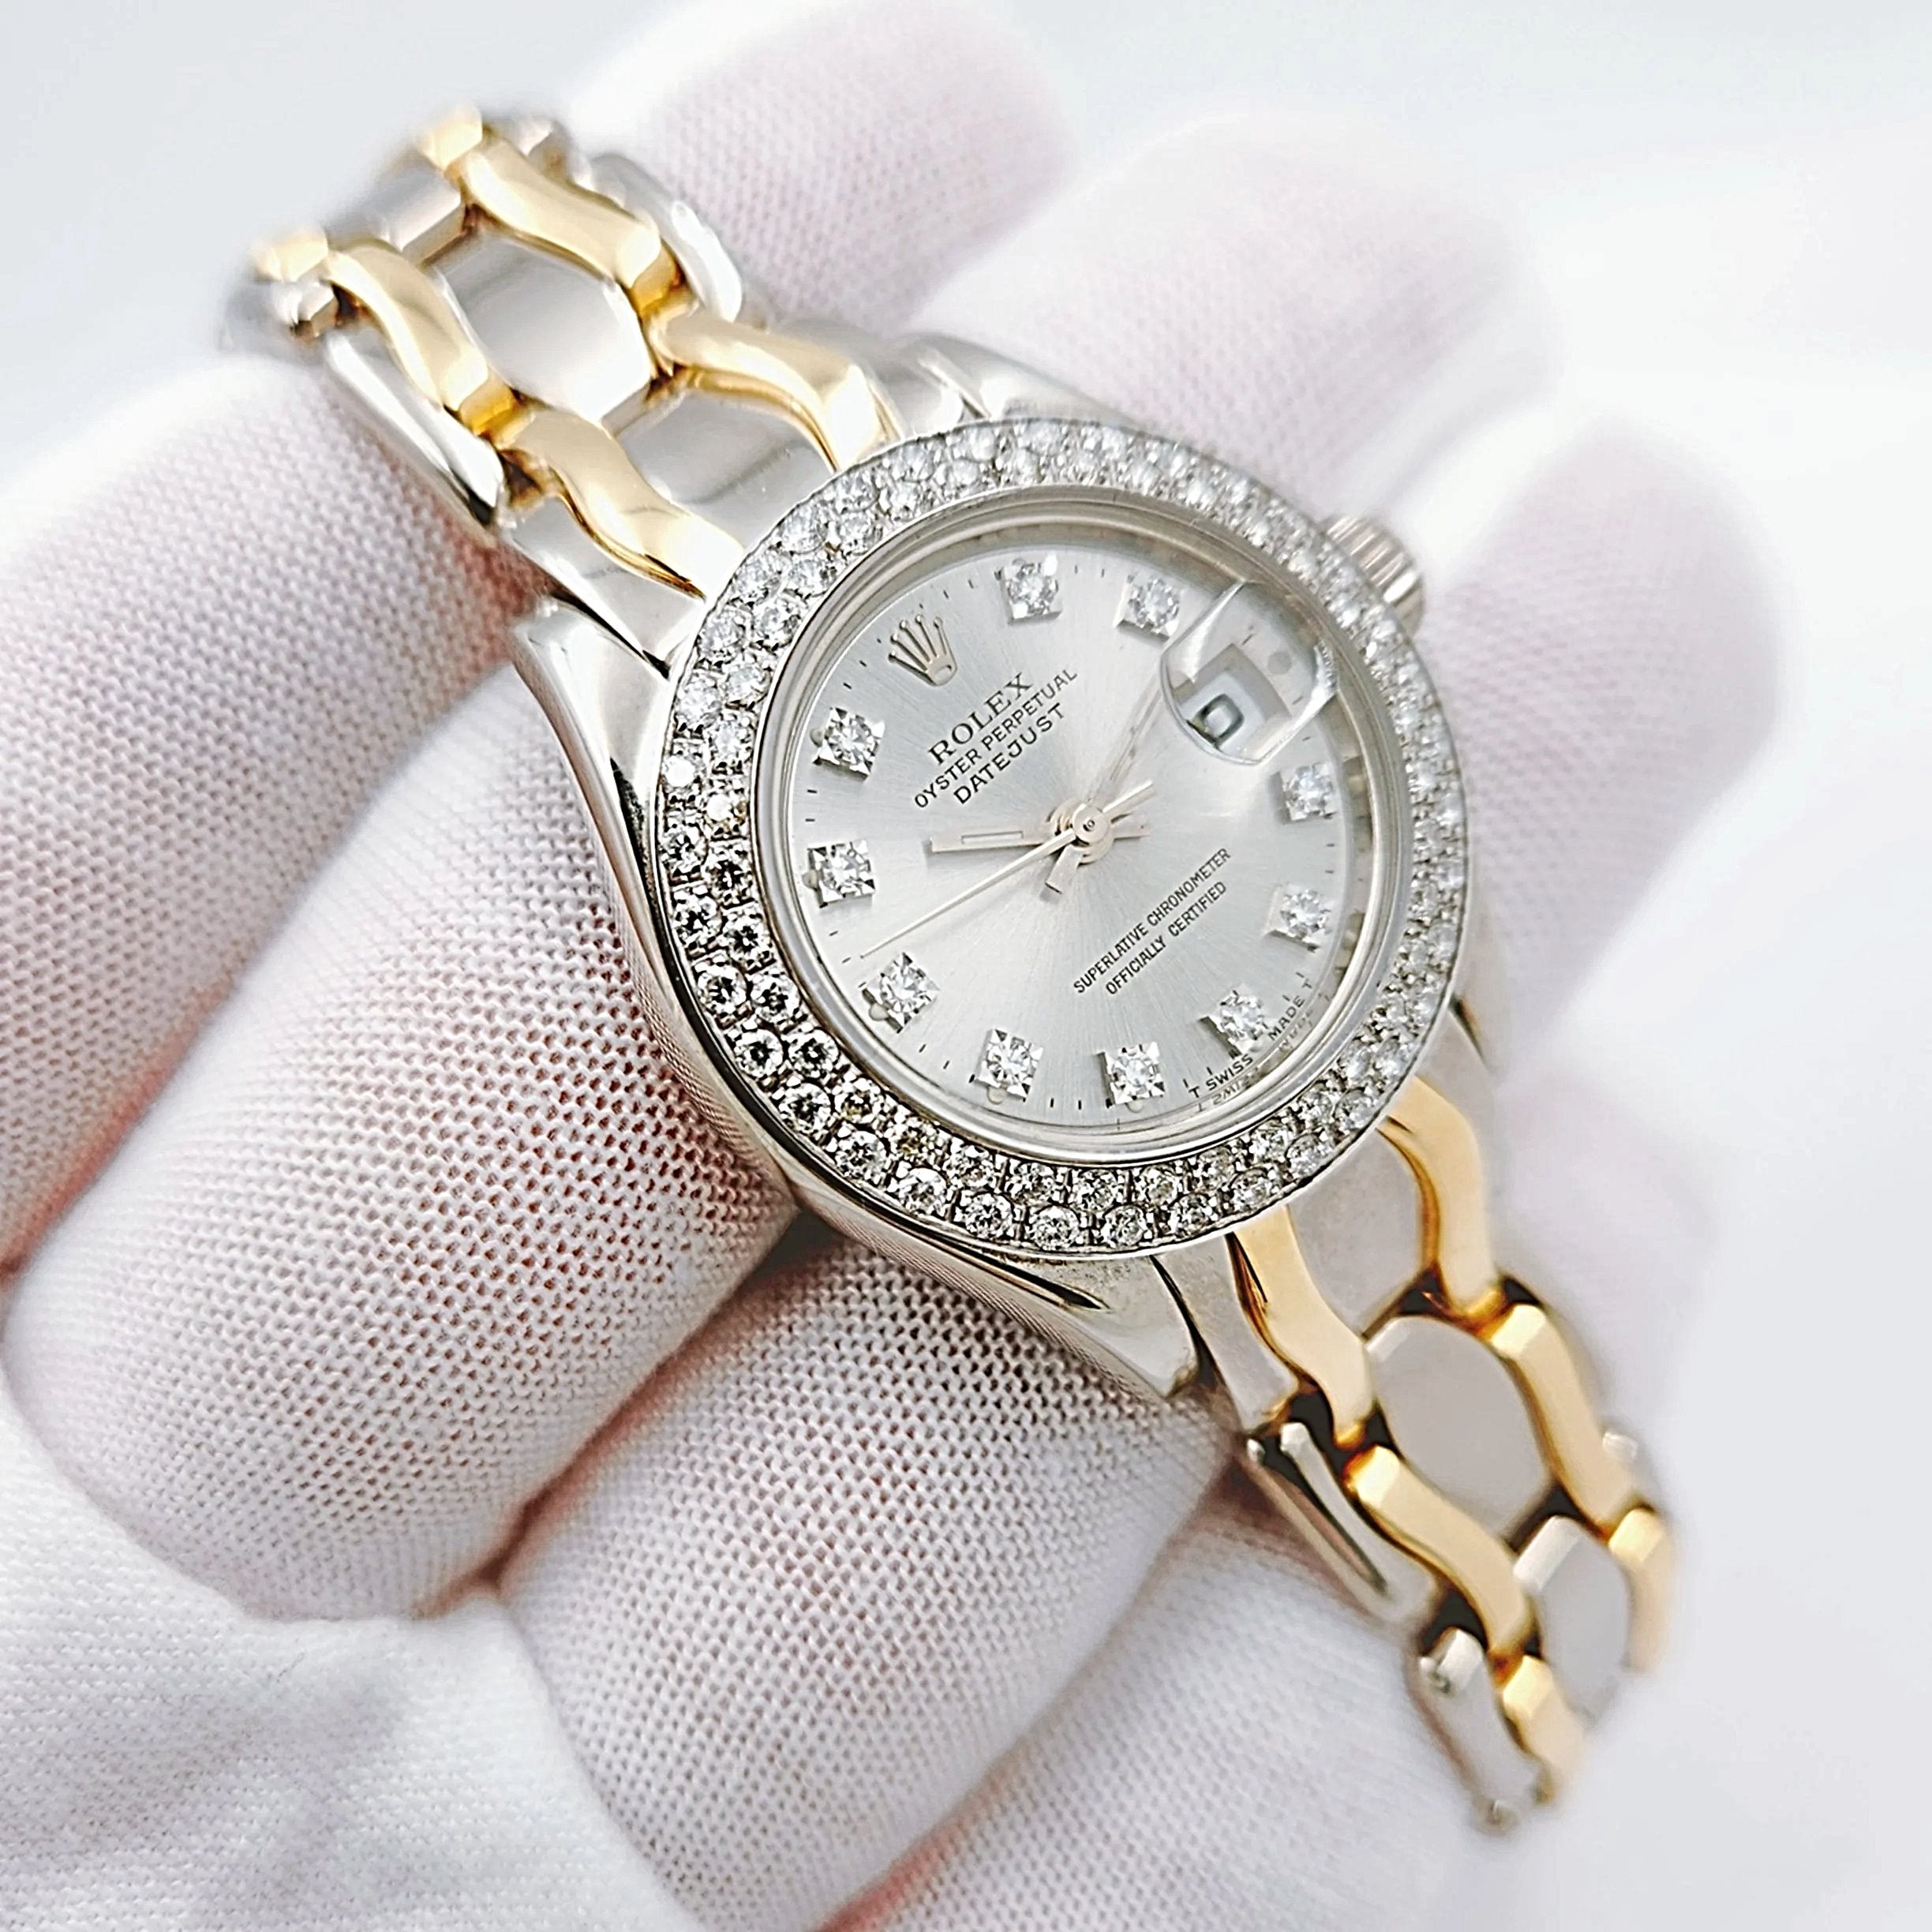 Ladies Rolex 29mm Pearlmaster Two Tone 18K White Gold / 18K Yellow Gold Watch with Silver Diamond Dial and Diamond Bezel. (Pre-Owned 69329)